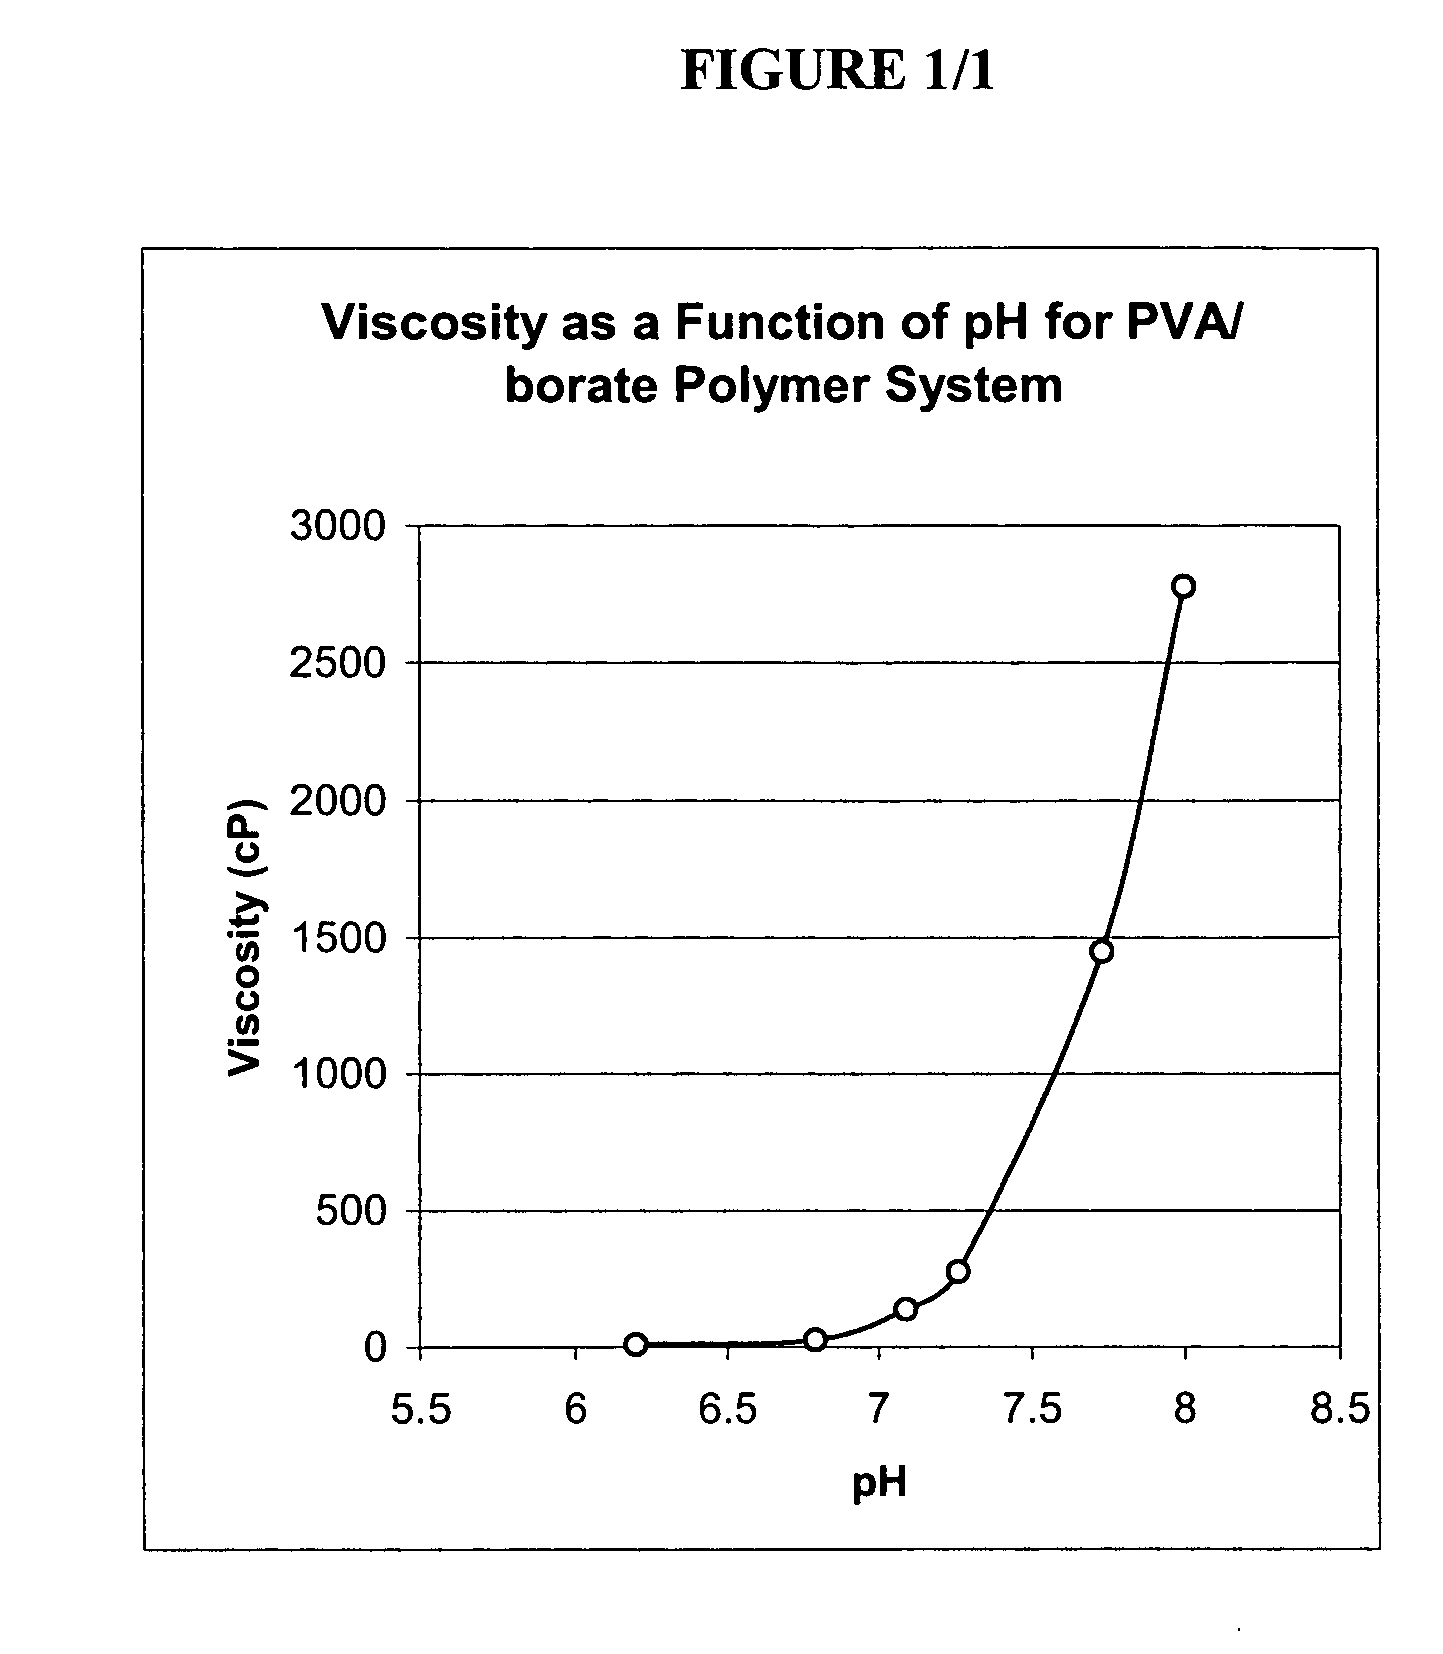 Ophthalmic compositions containing a PVA/borate gelling system